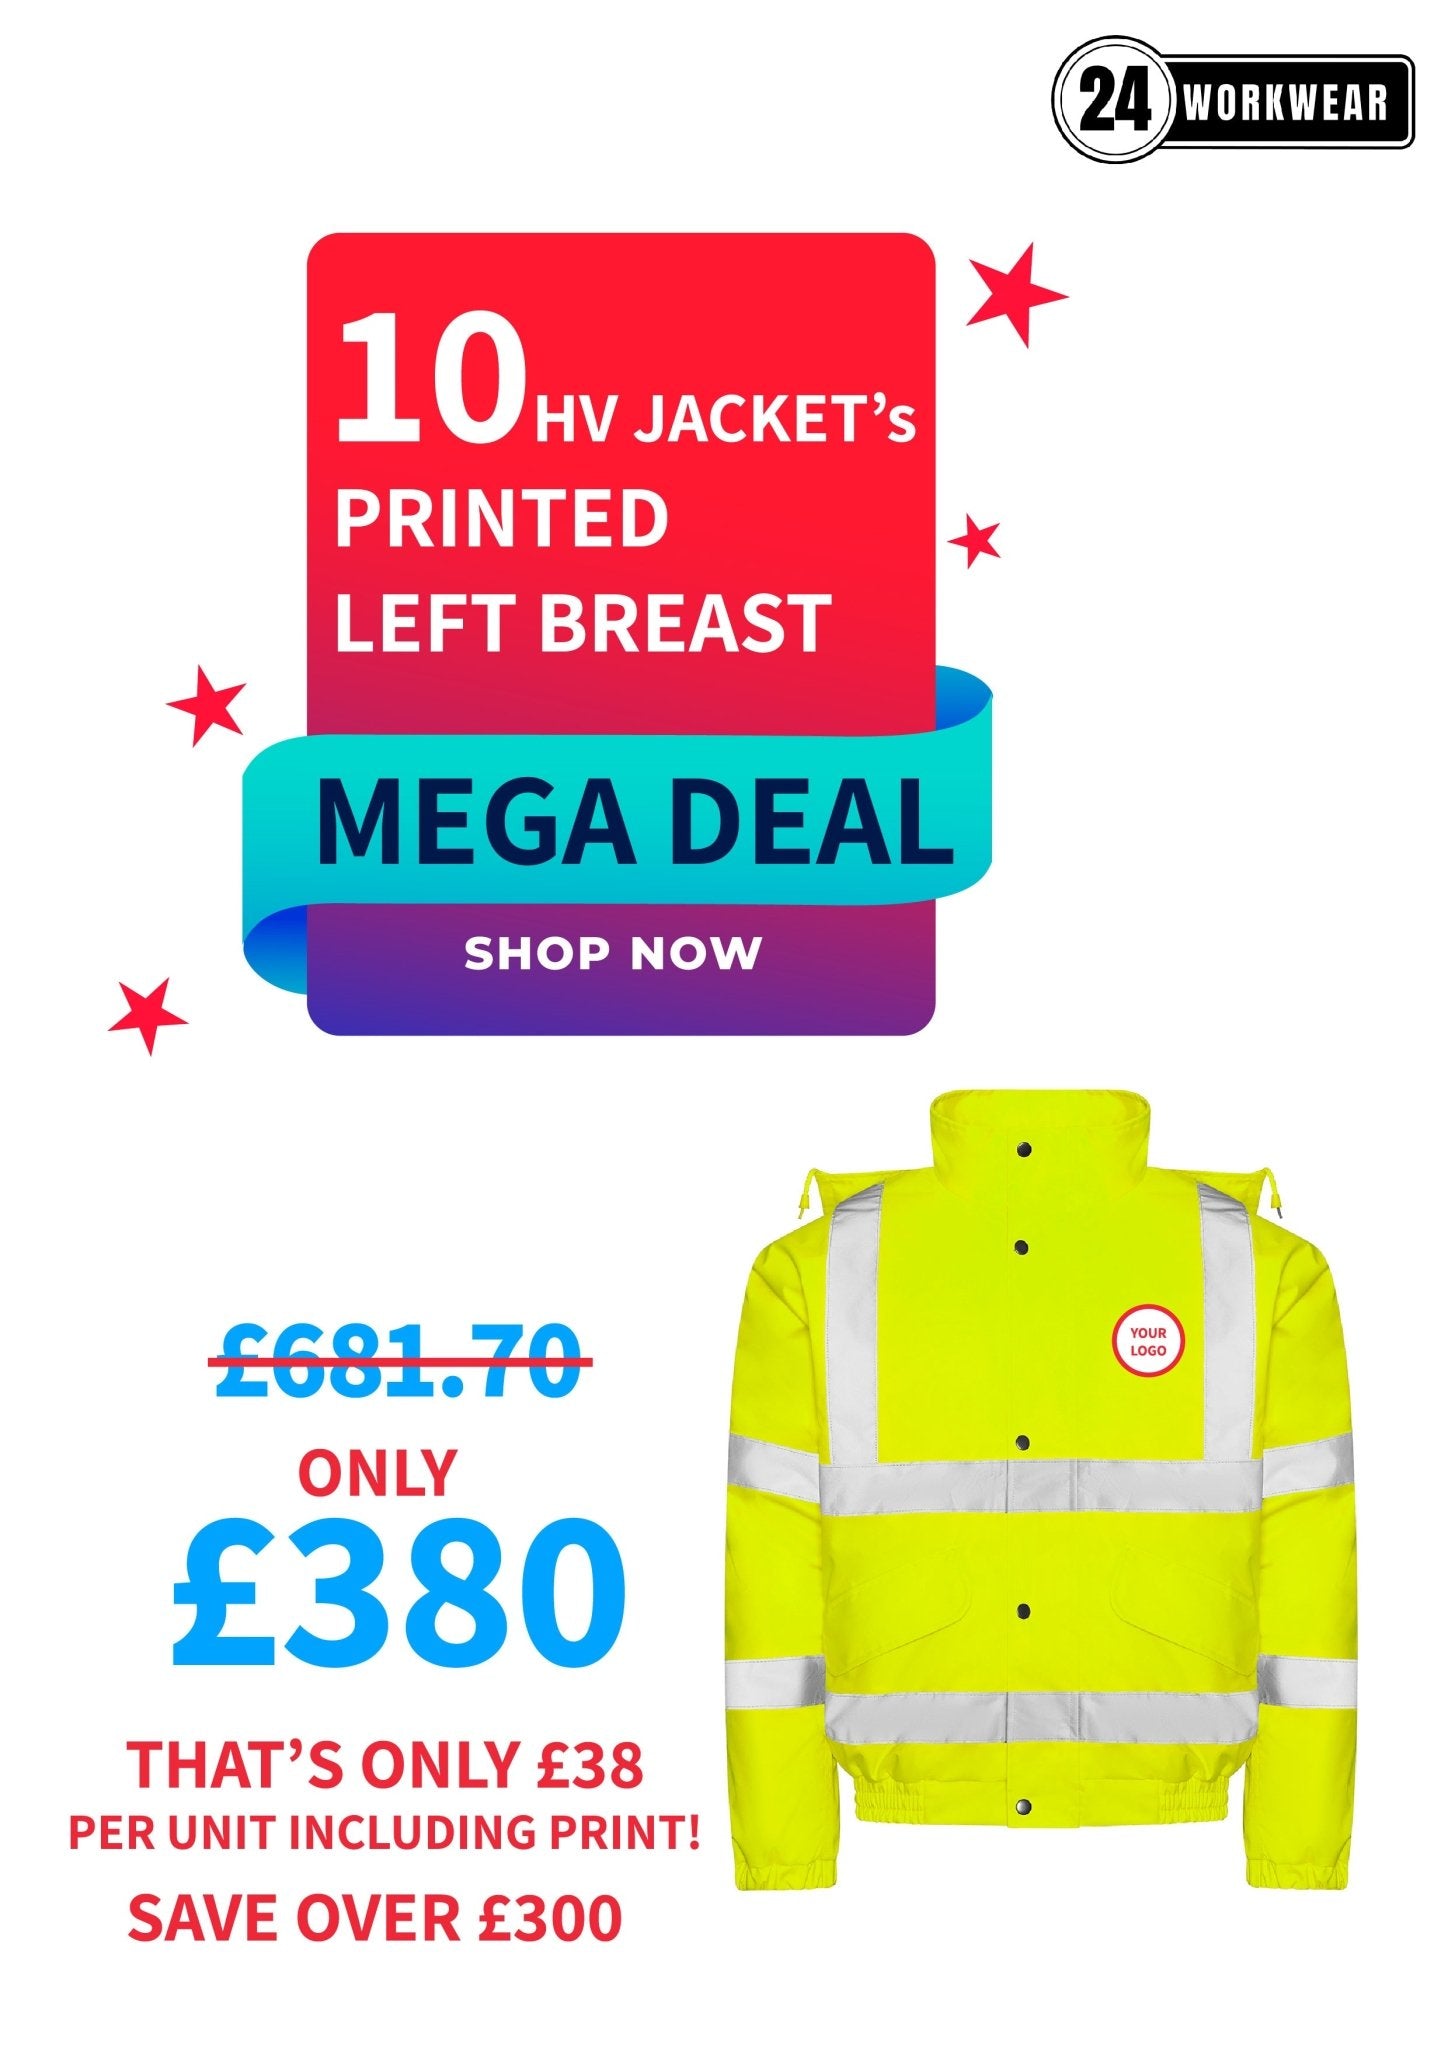 10 x High Visibility Bomber Jackets Deal - 24 Workwear - High Visibility